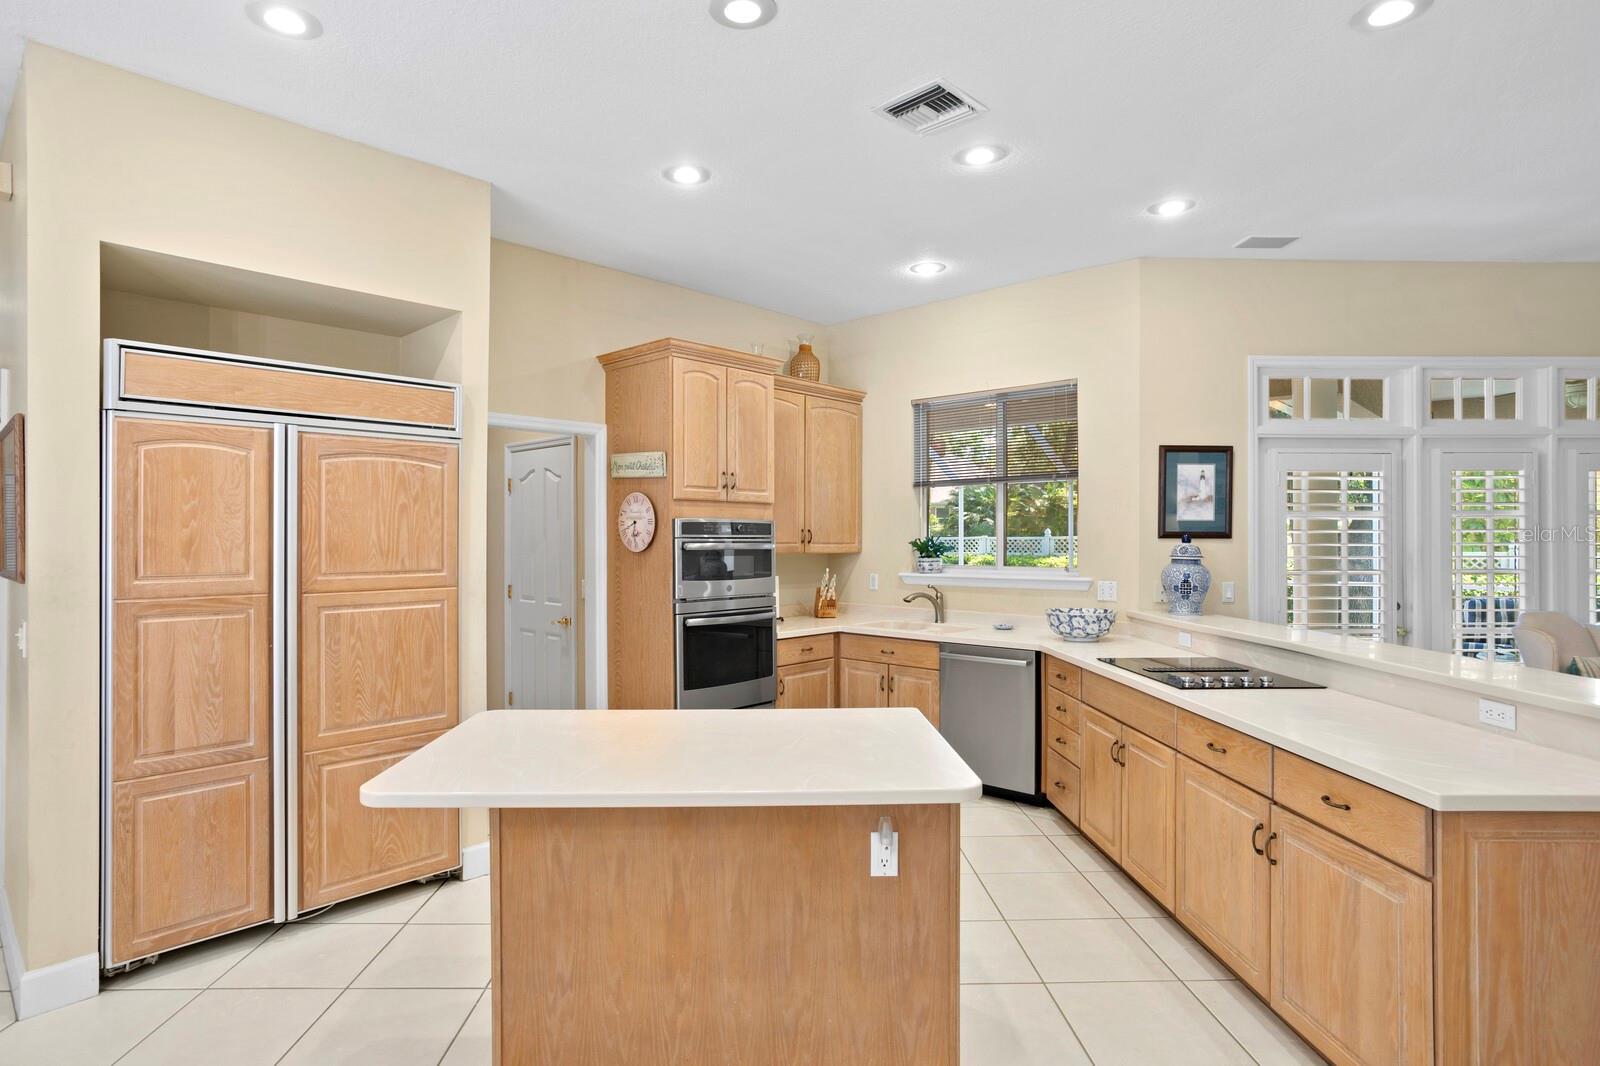 Center Island, Wood Cabinets, Large Walk-In Patry